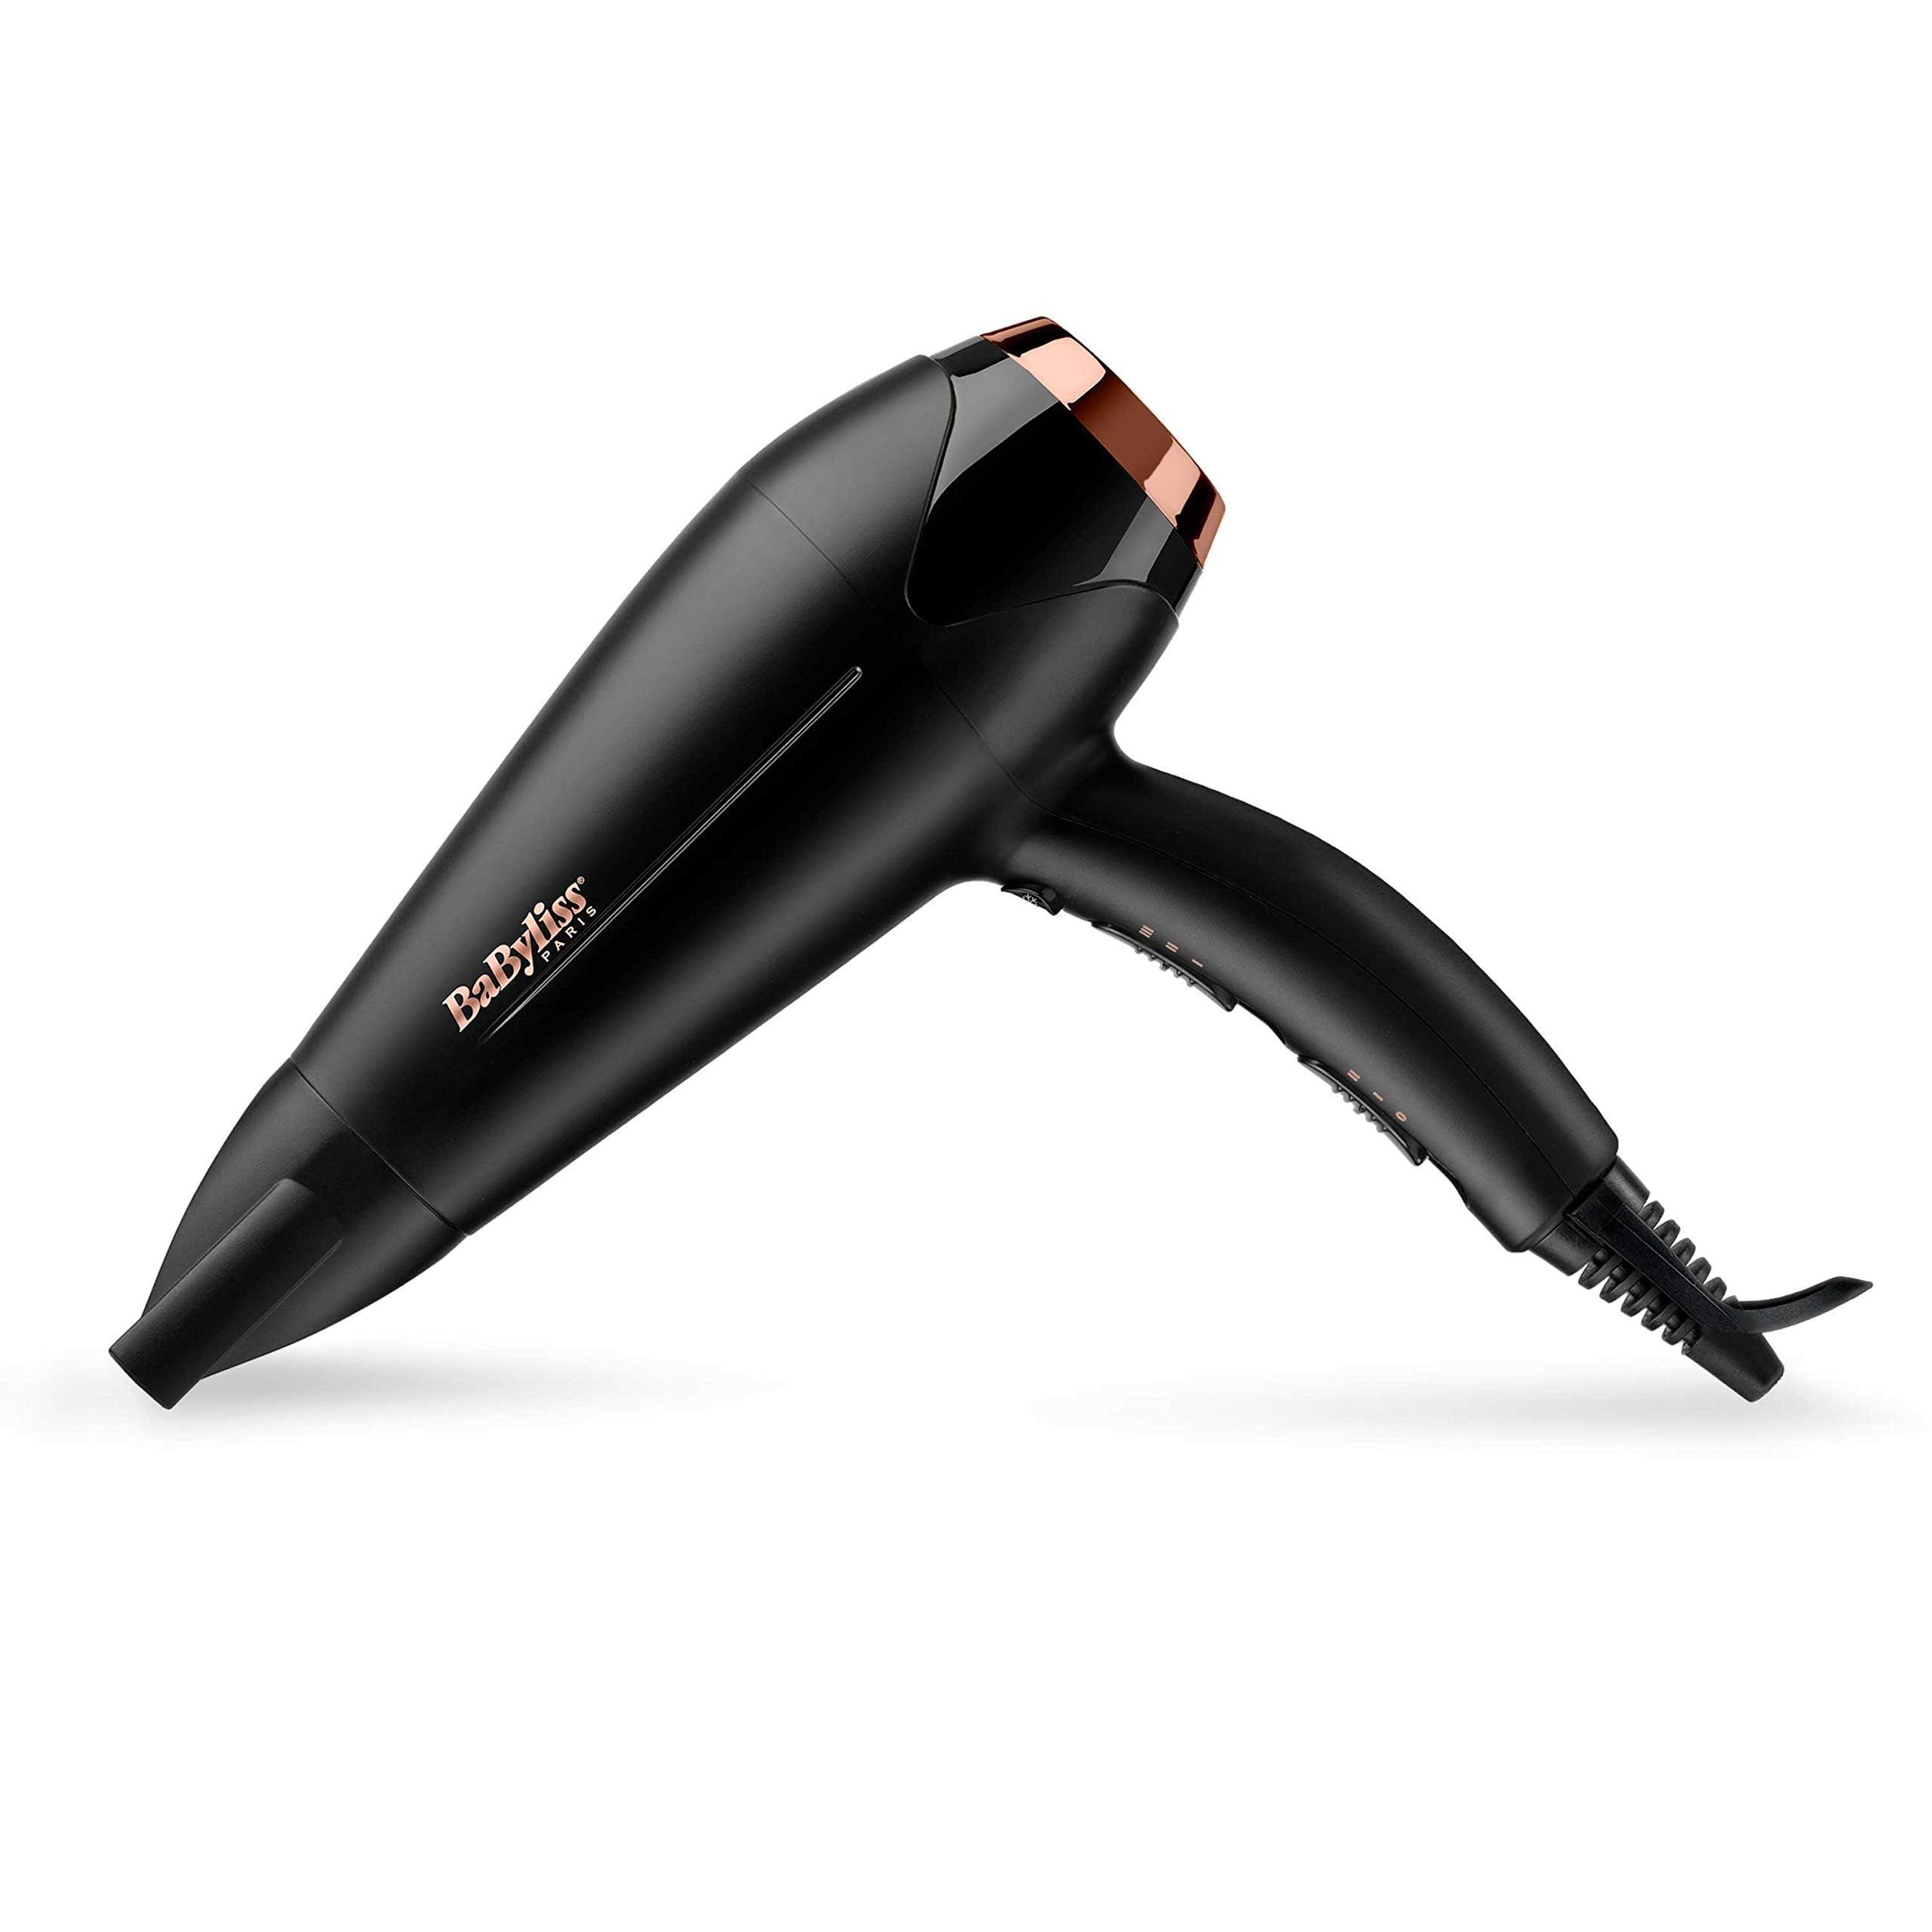 BaByliss DC Motor Hair Dryer | 2200W 3 Heat & 2 Speed Settings With Cool Shot Button | Ionic Technology For Frizz Free Hair | Comfortable Lightweight Black Design With Diffuser